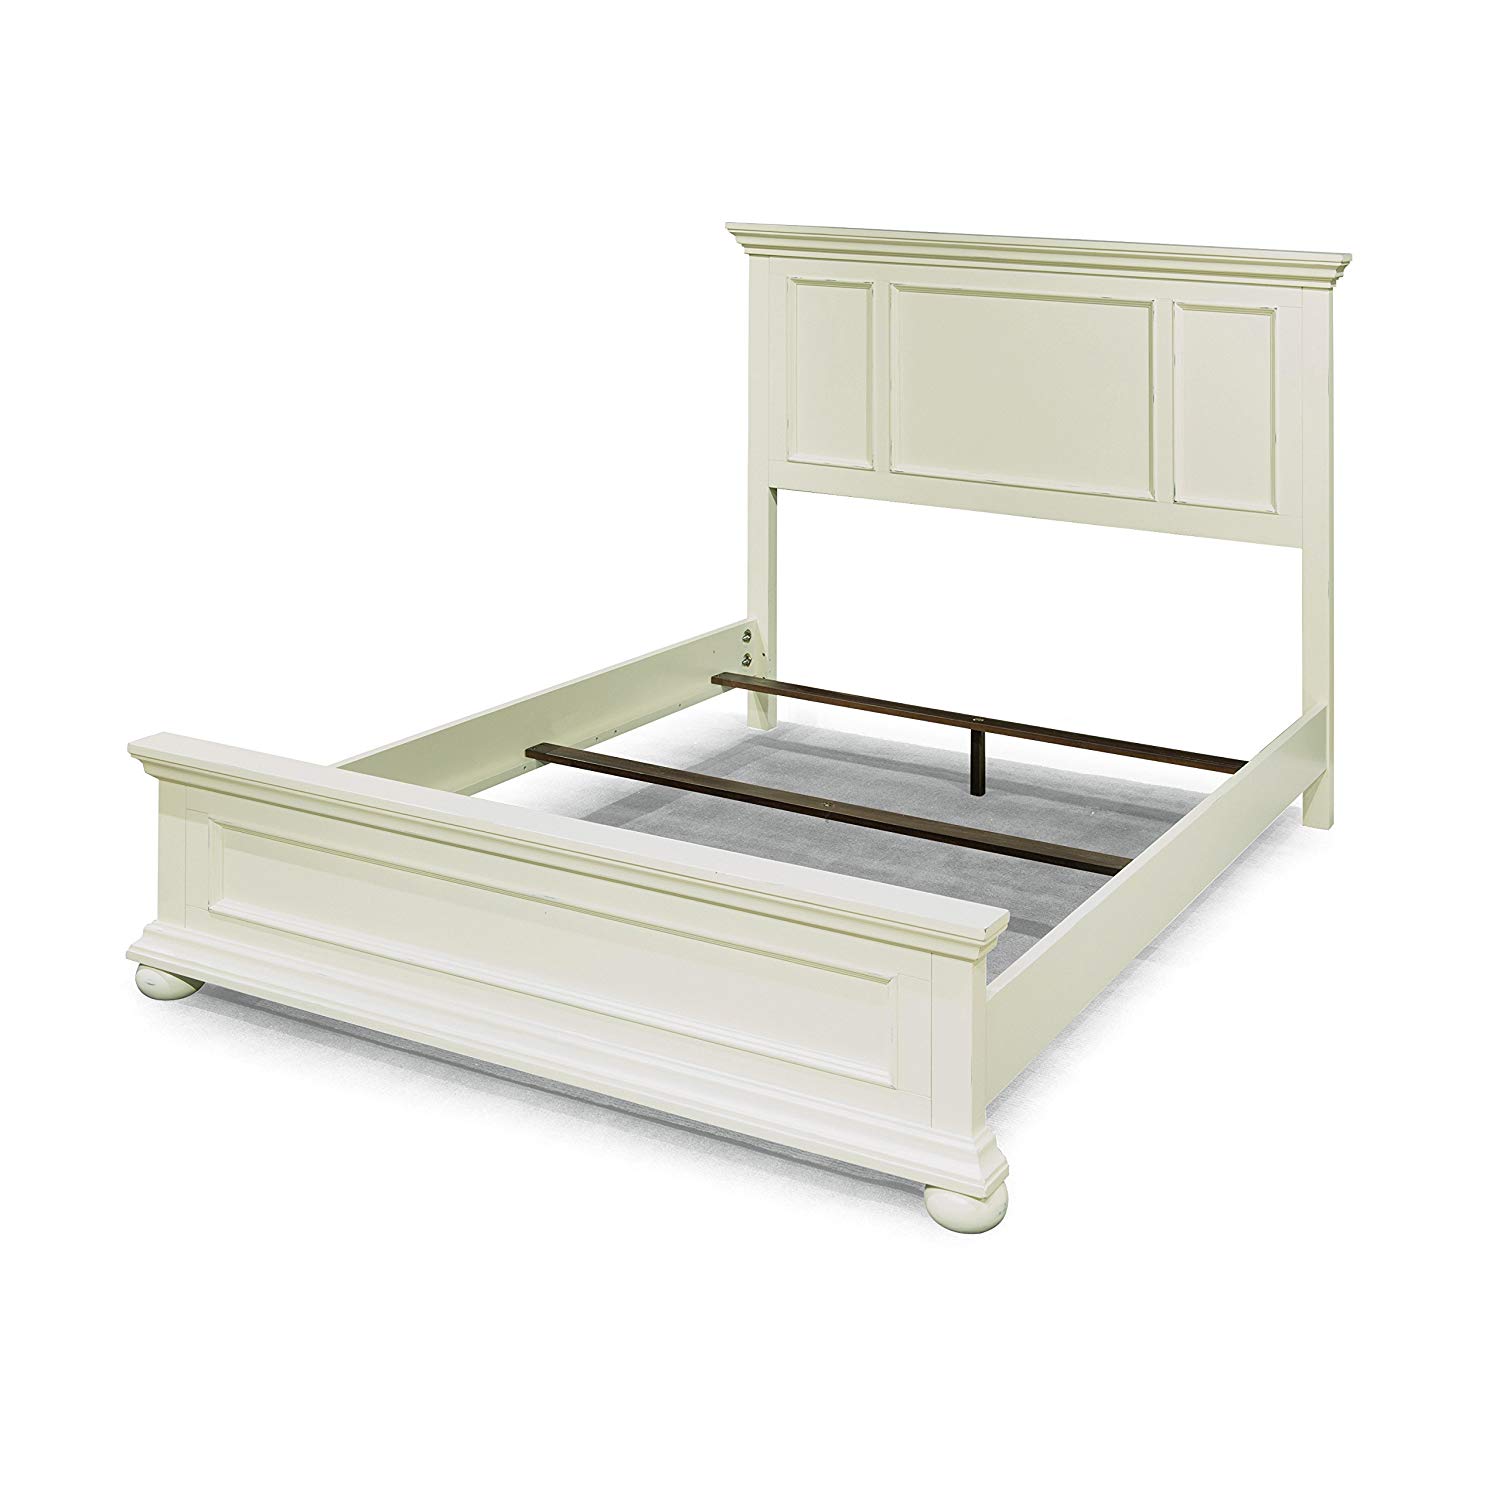 Dover White King Bed & Night Stand - image 2 of 7